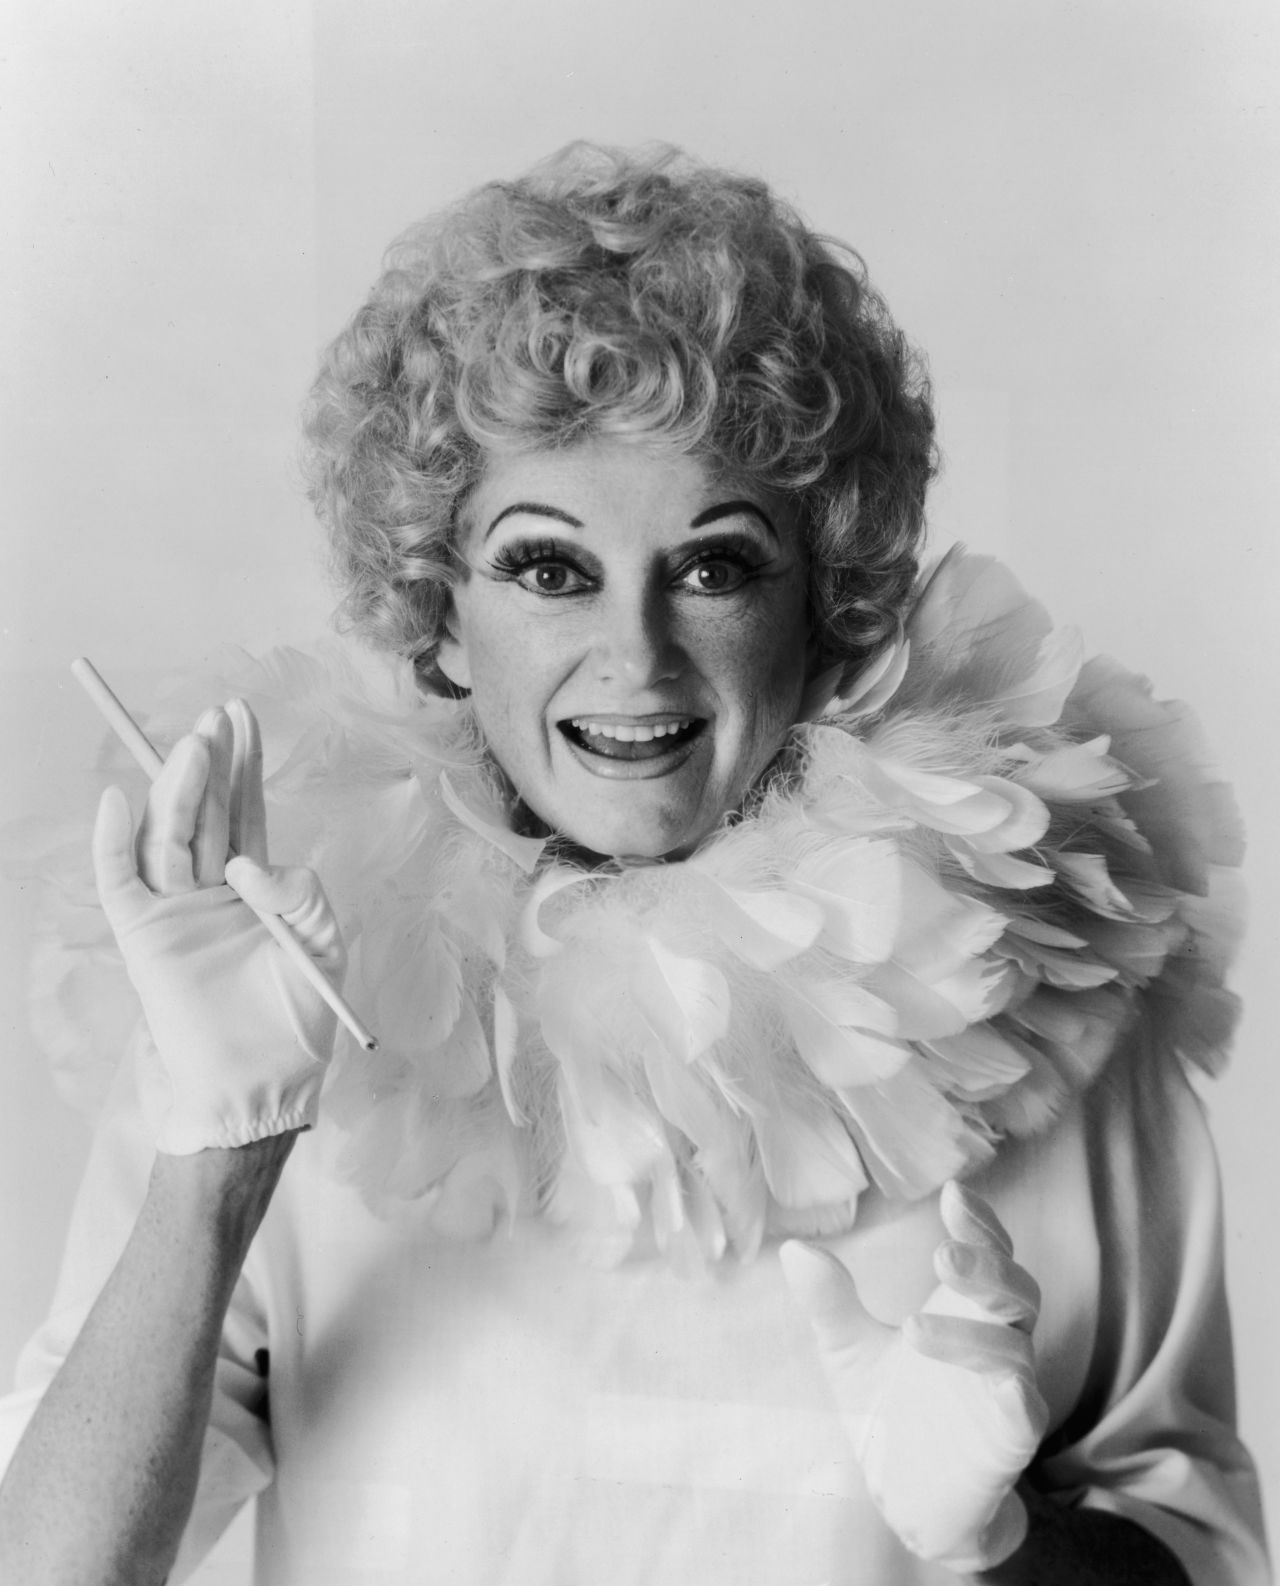 Comedian <a href="http://www.cnn.com/2012/08/20/showbiz/phyllis-diller-obit/index.html">Phyllis Diller</a>, known for her self-deprecating humor, died "peacefully in her sleep" on August 20. She was 95.